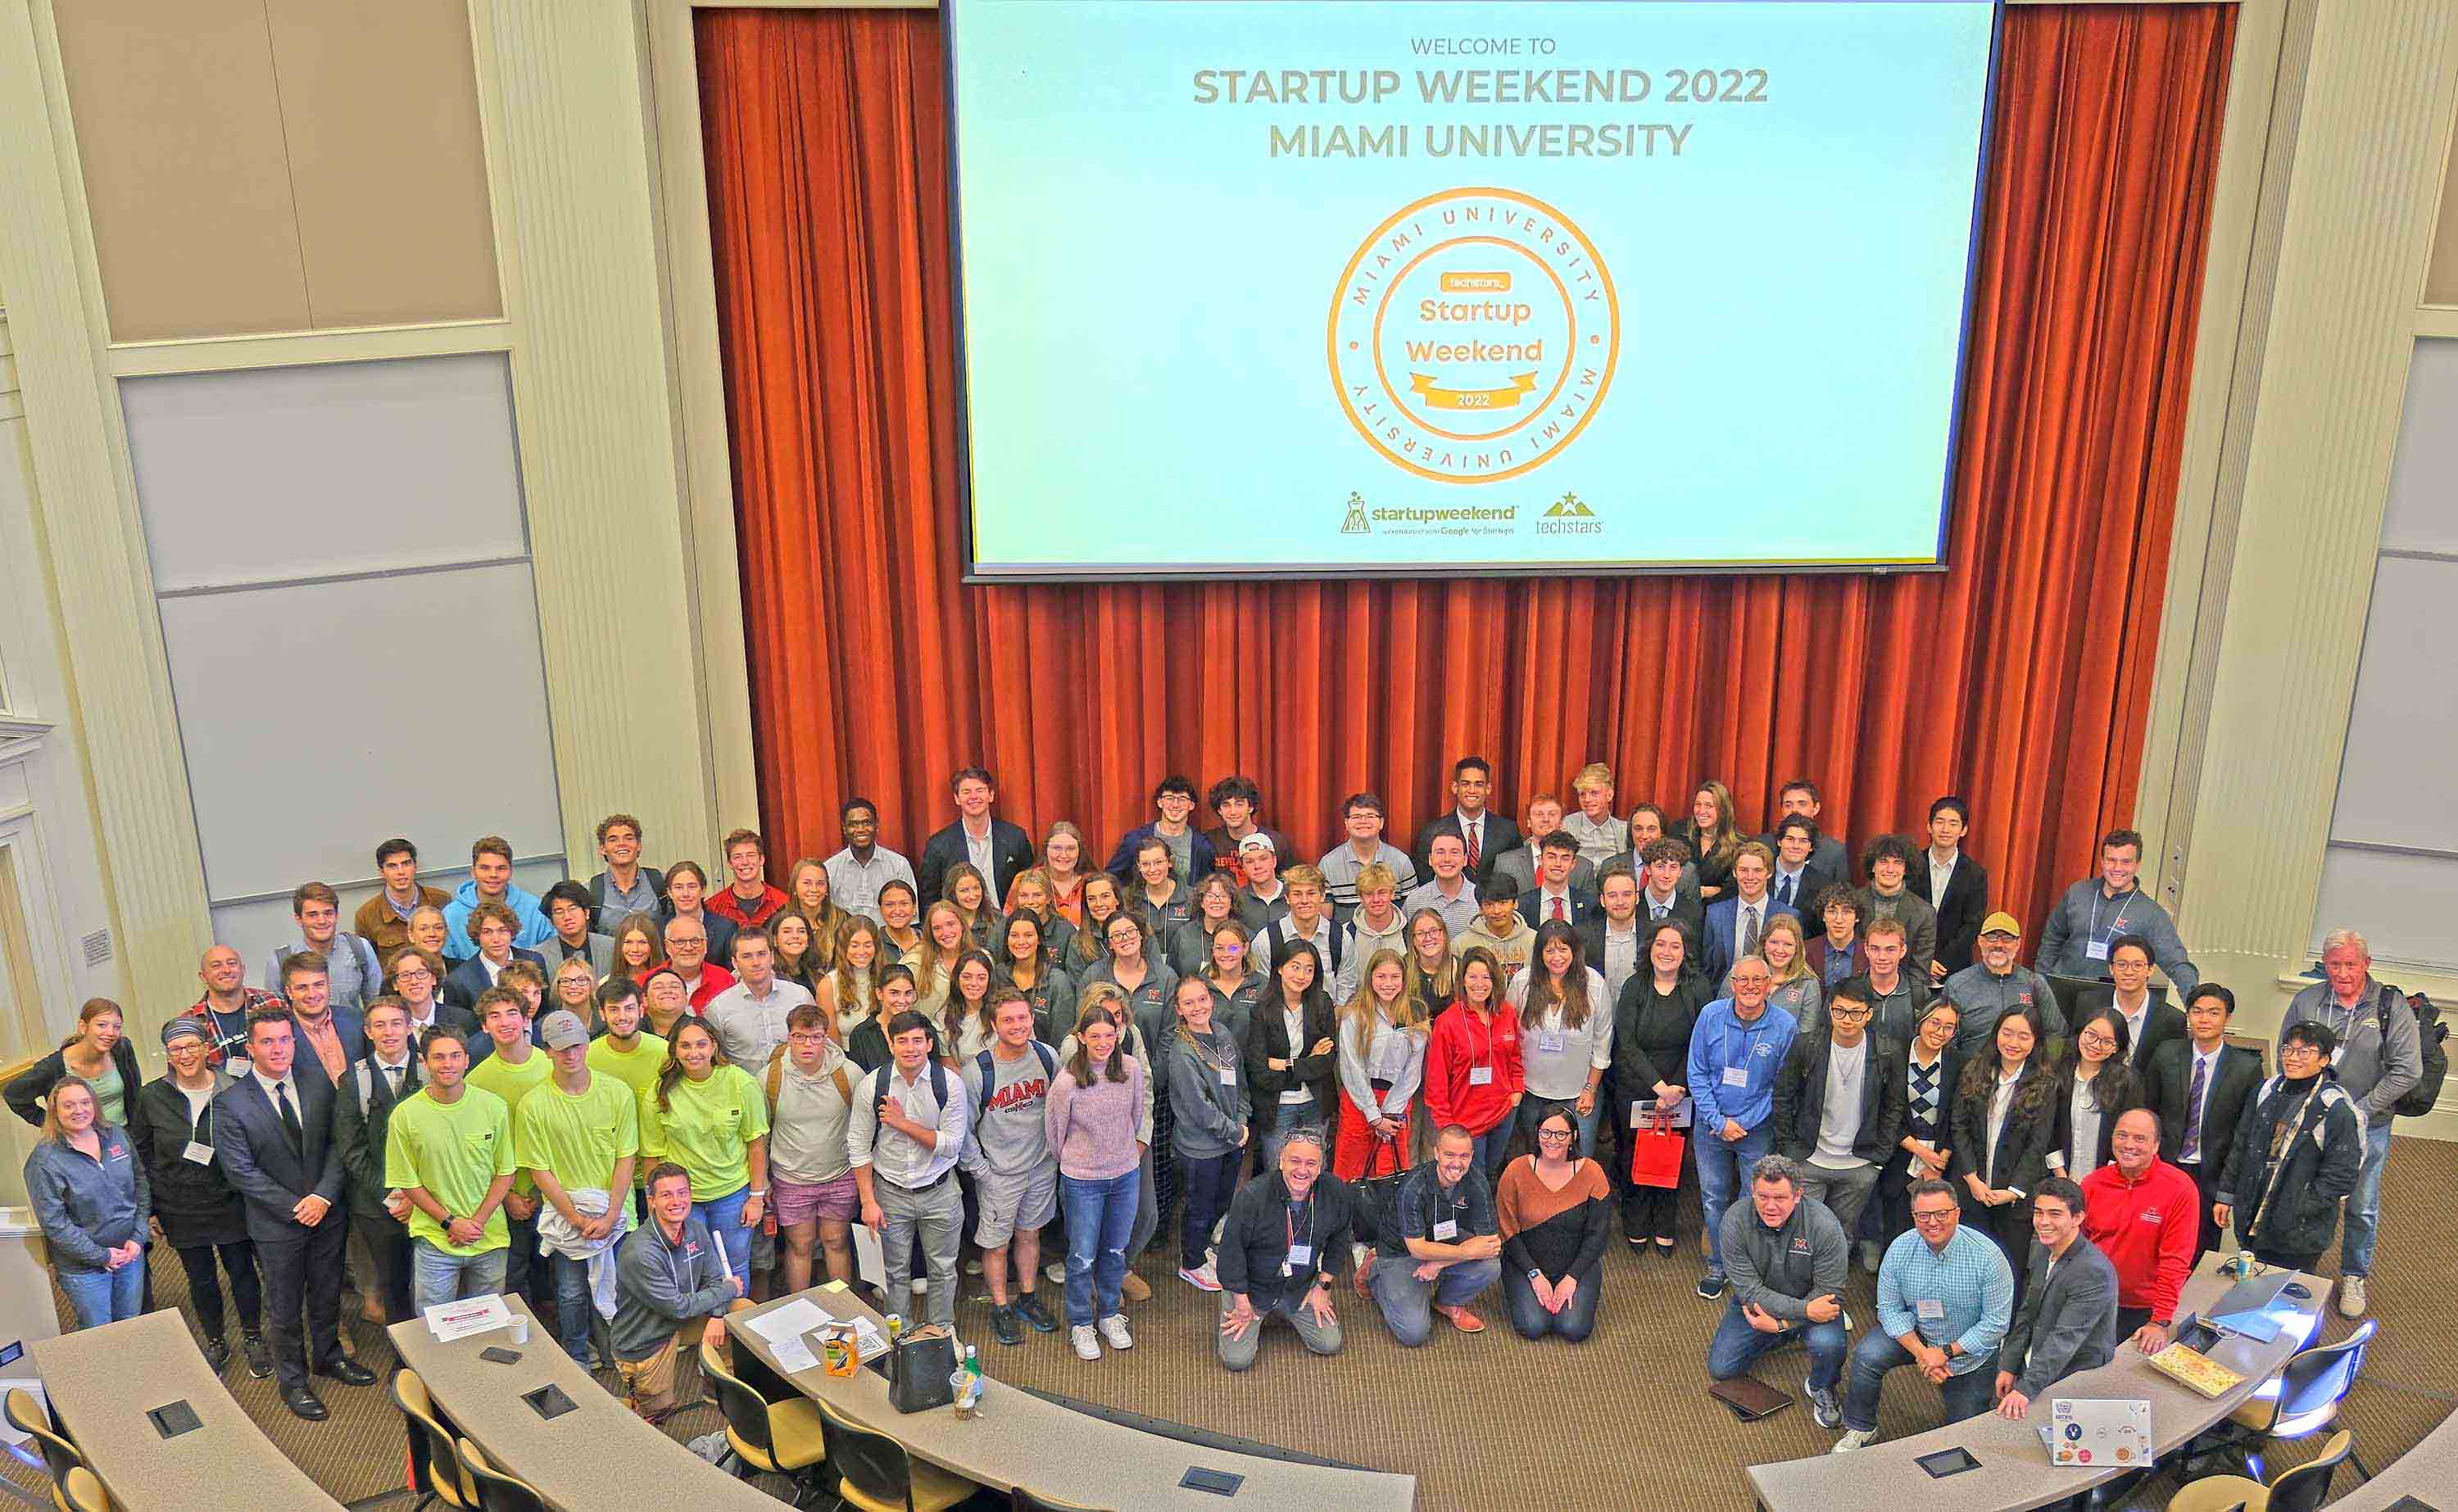 Group photo of Startup Weekend participants